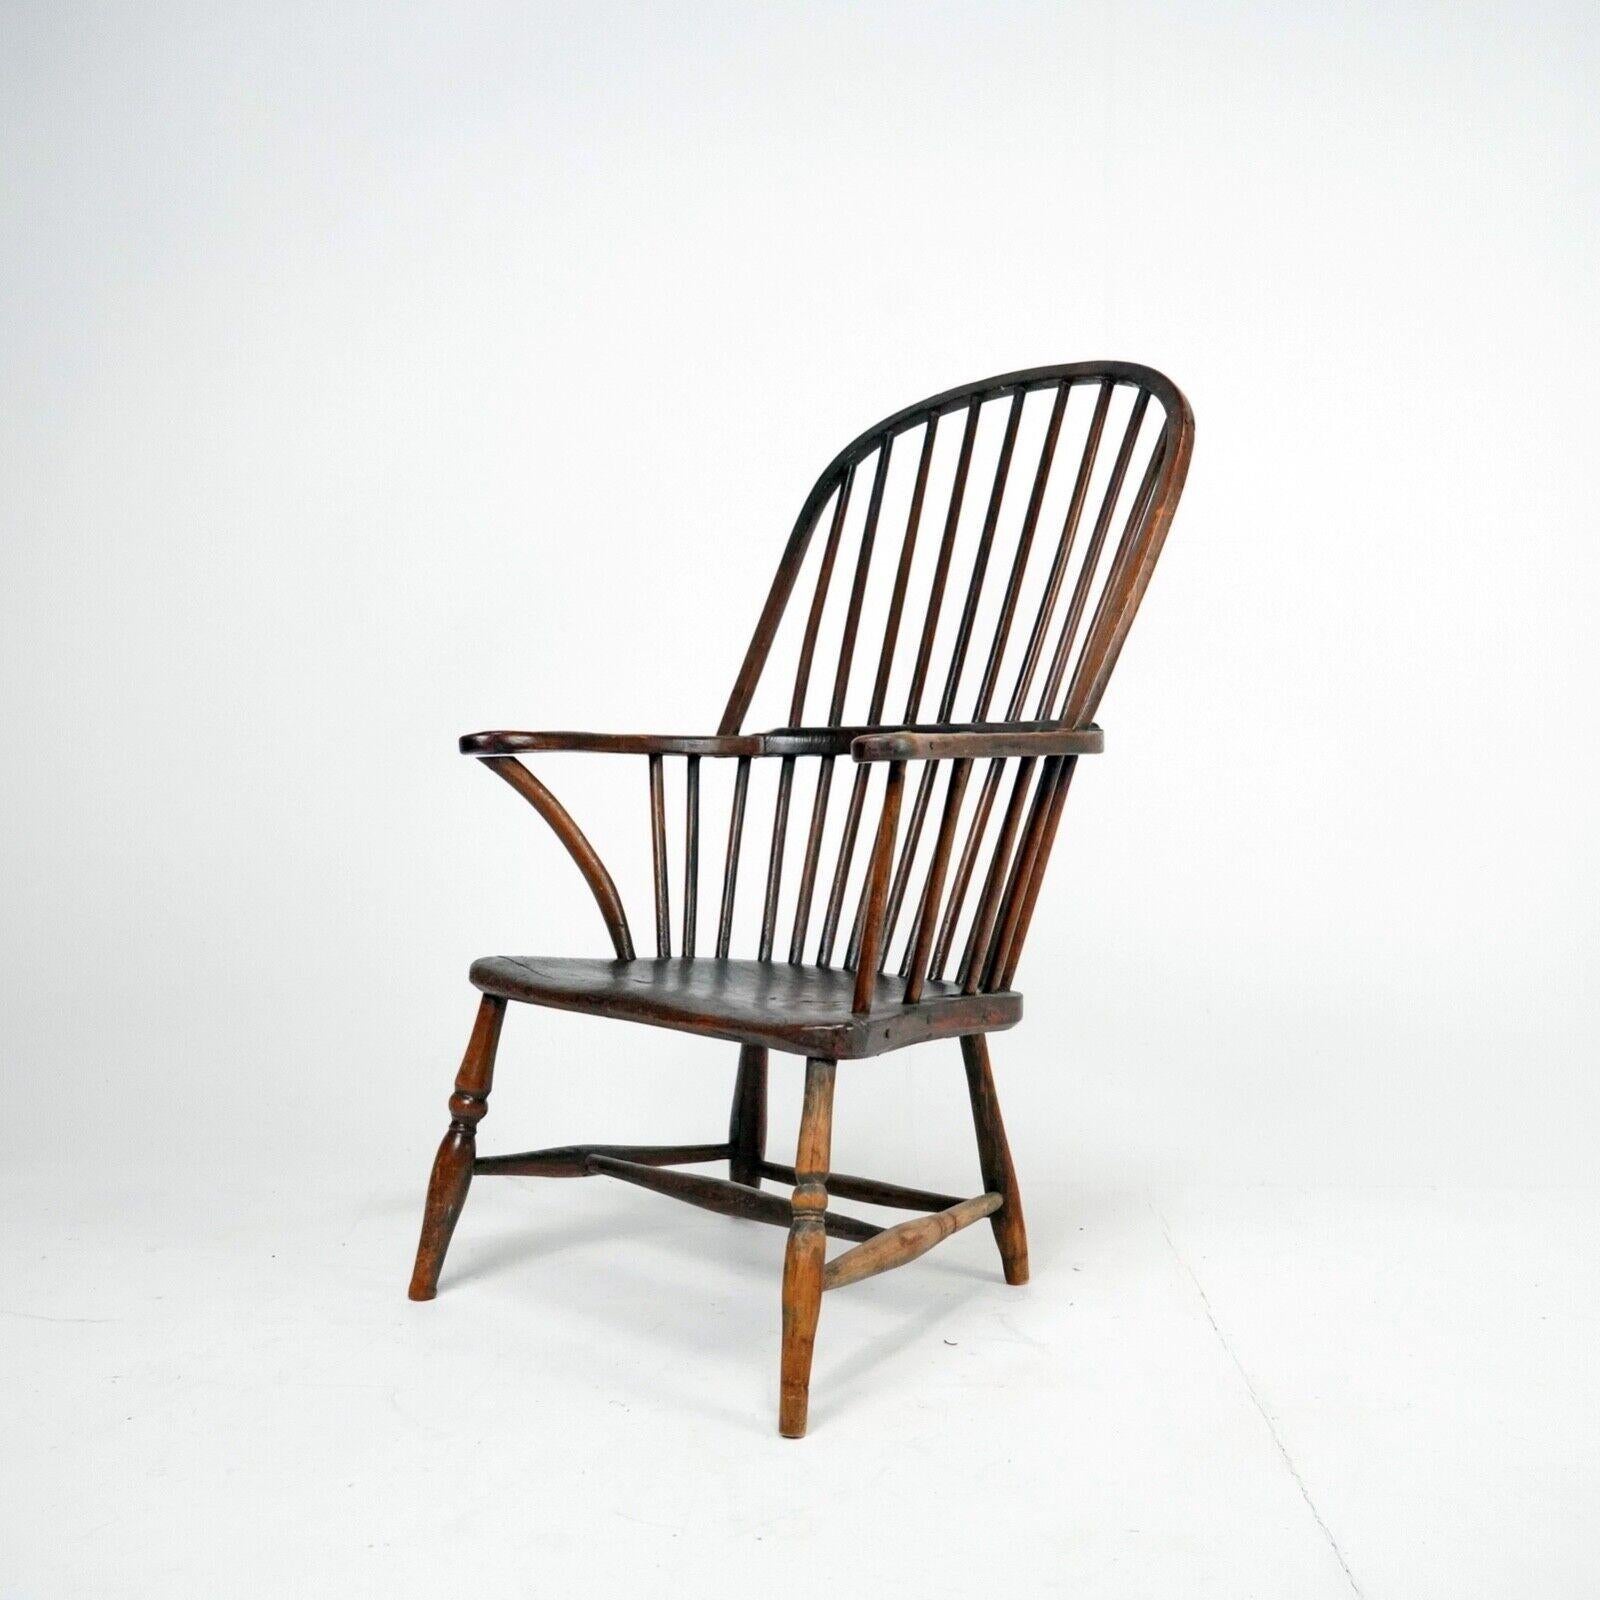 A Late 18th century elm and ash bow-back Windsor chair. 
Real individual character to this primitive looking example, each part unique and part of the chairs history. 
Lovely slab seat, nice old repair to the arm bow.
A low chair that would sit